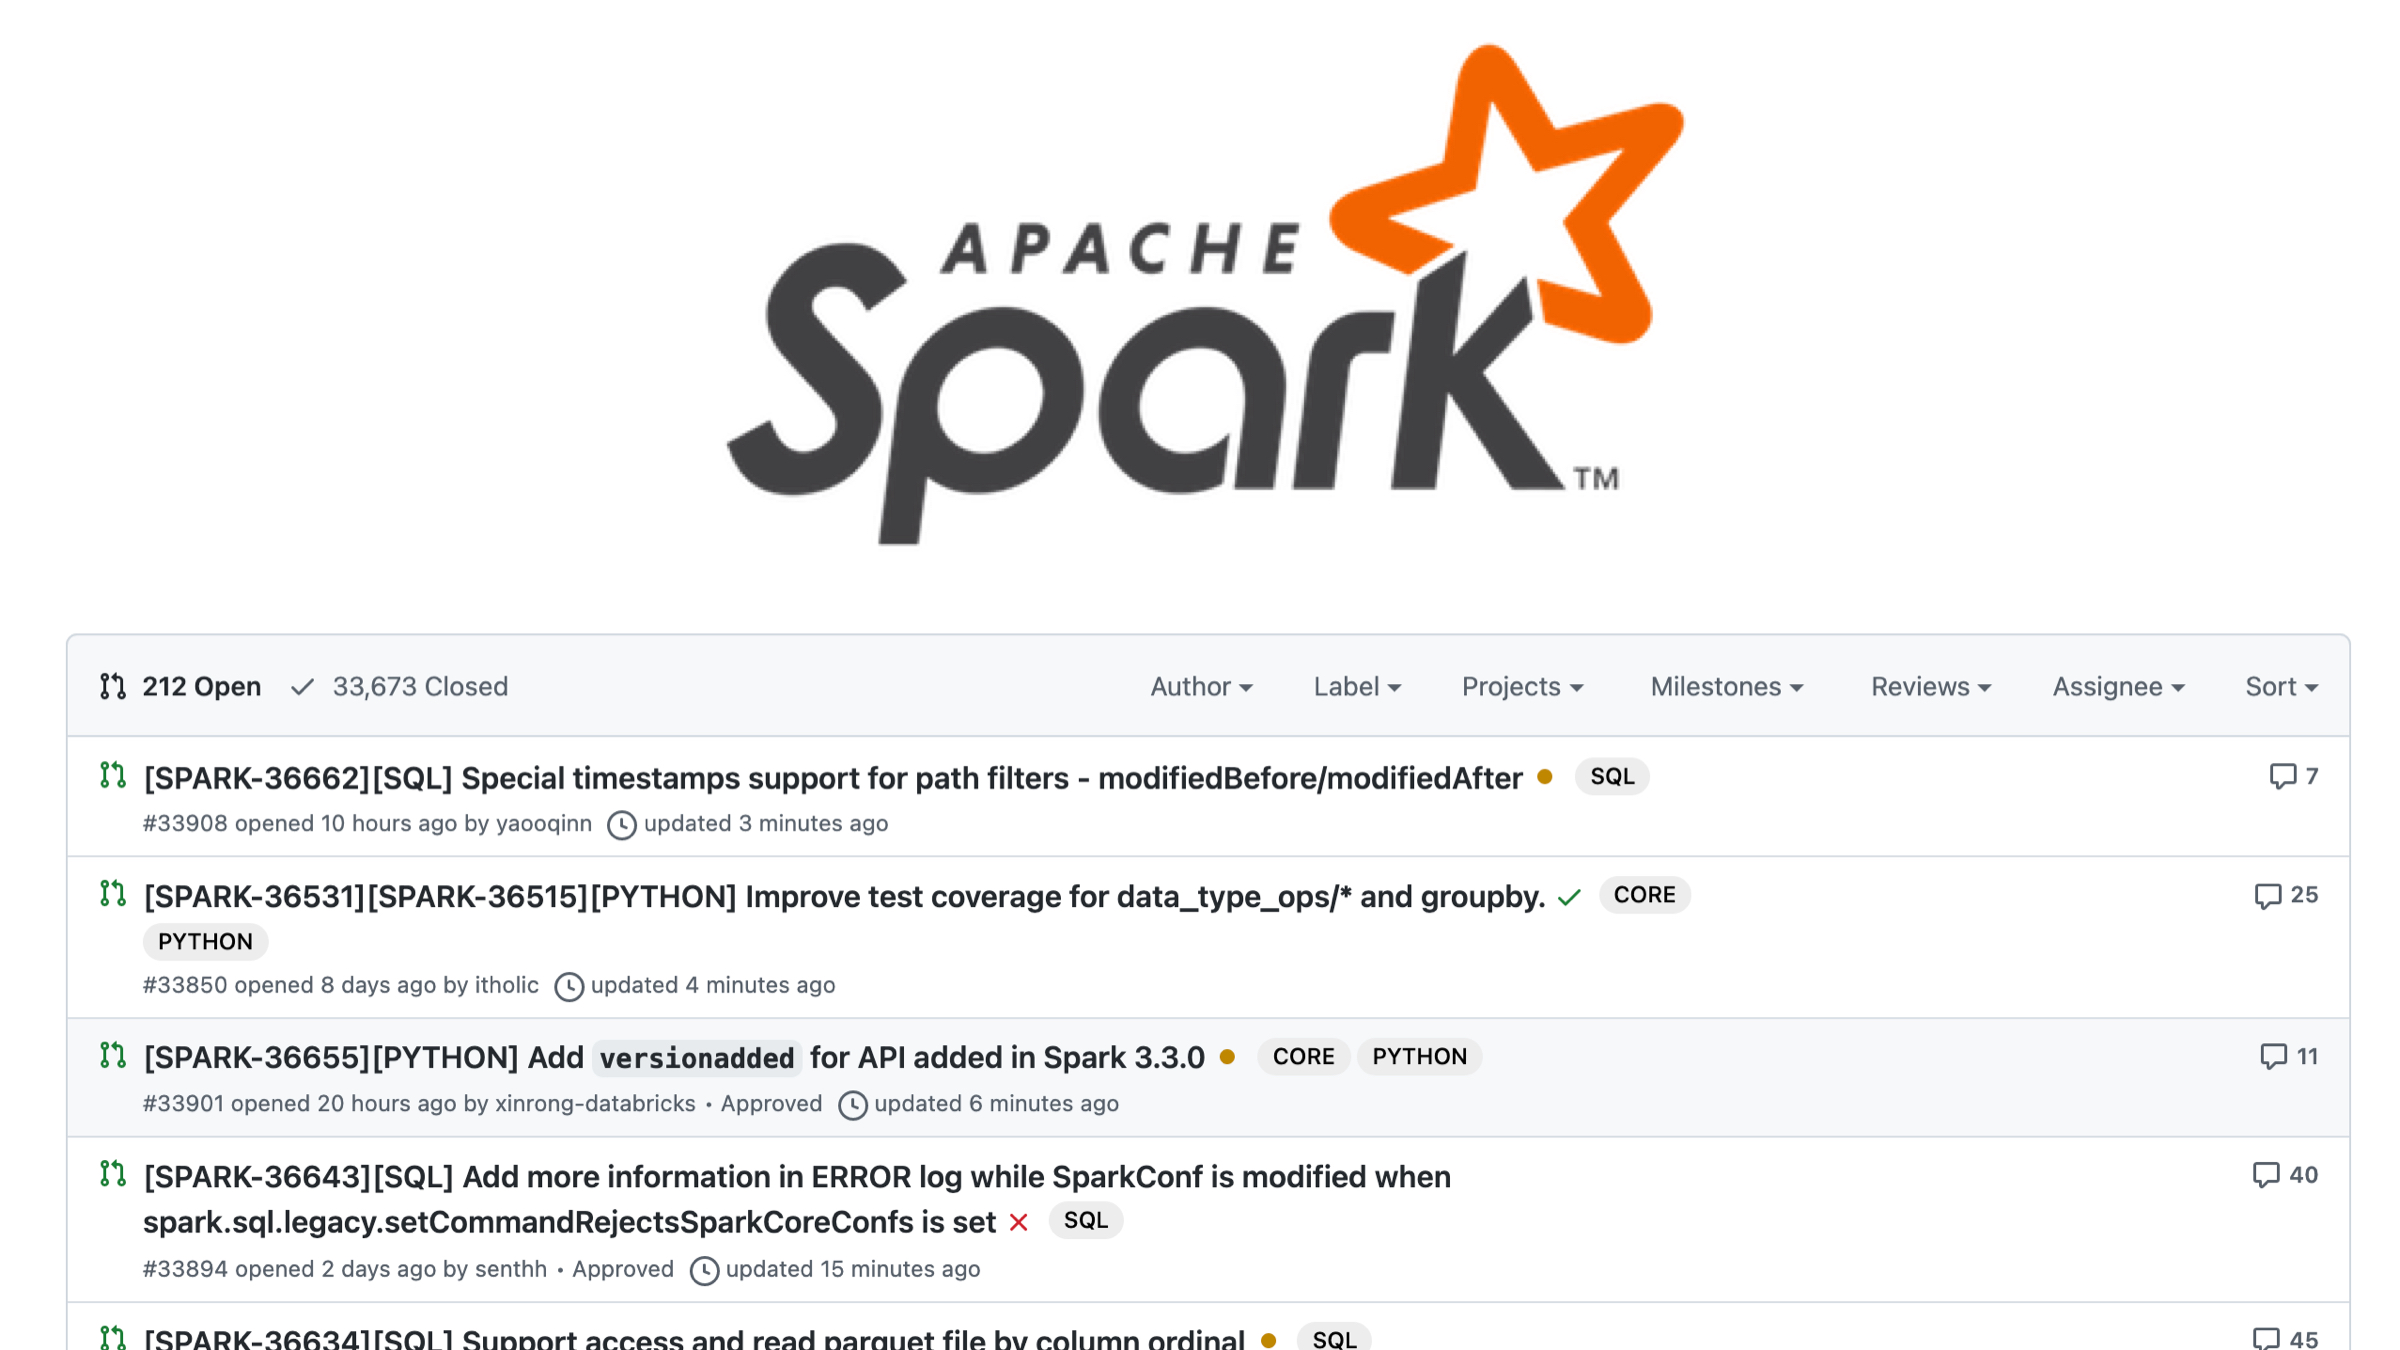 images/how-apache-spark-does-code-review-best-practices-github.jpg